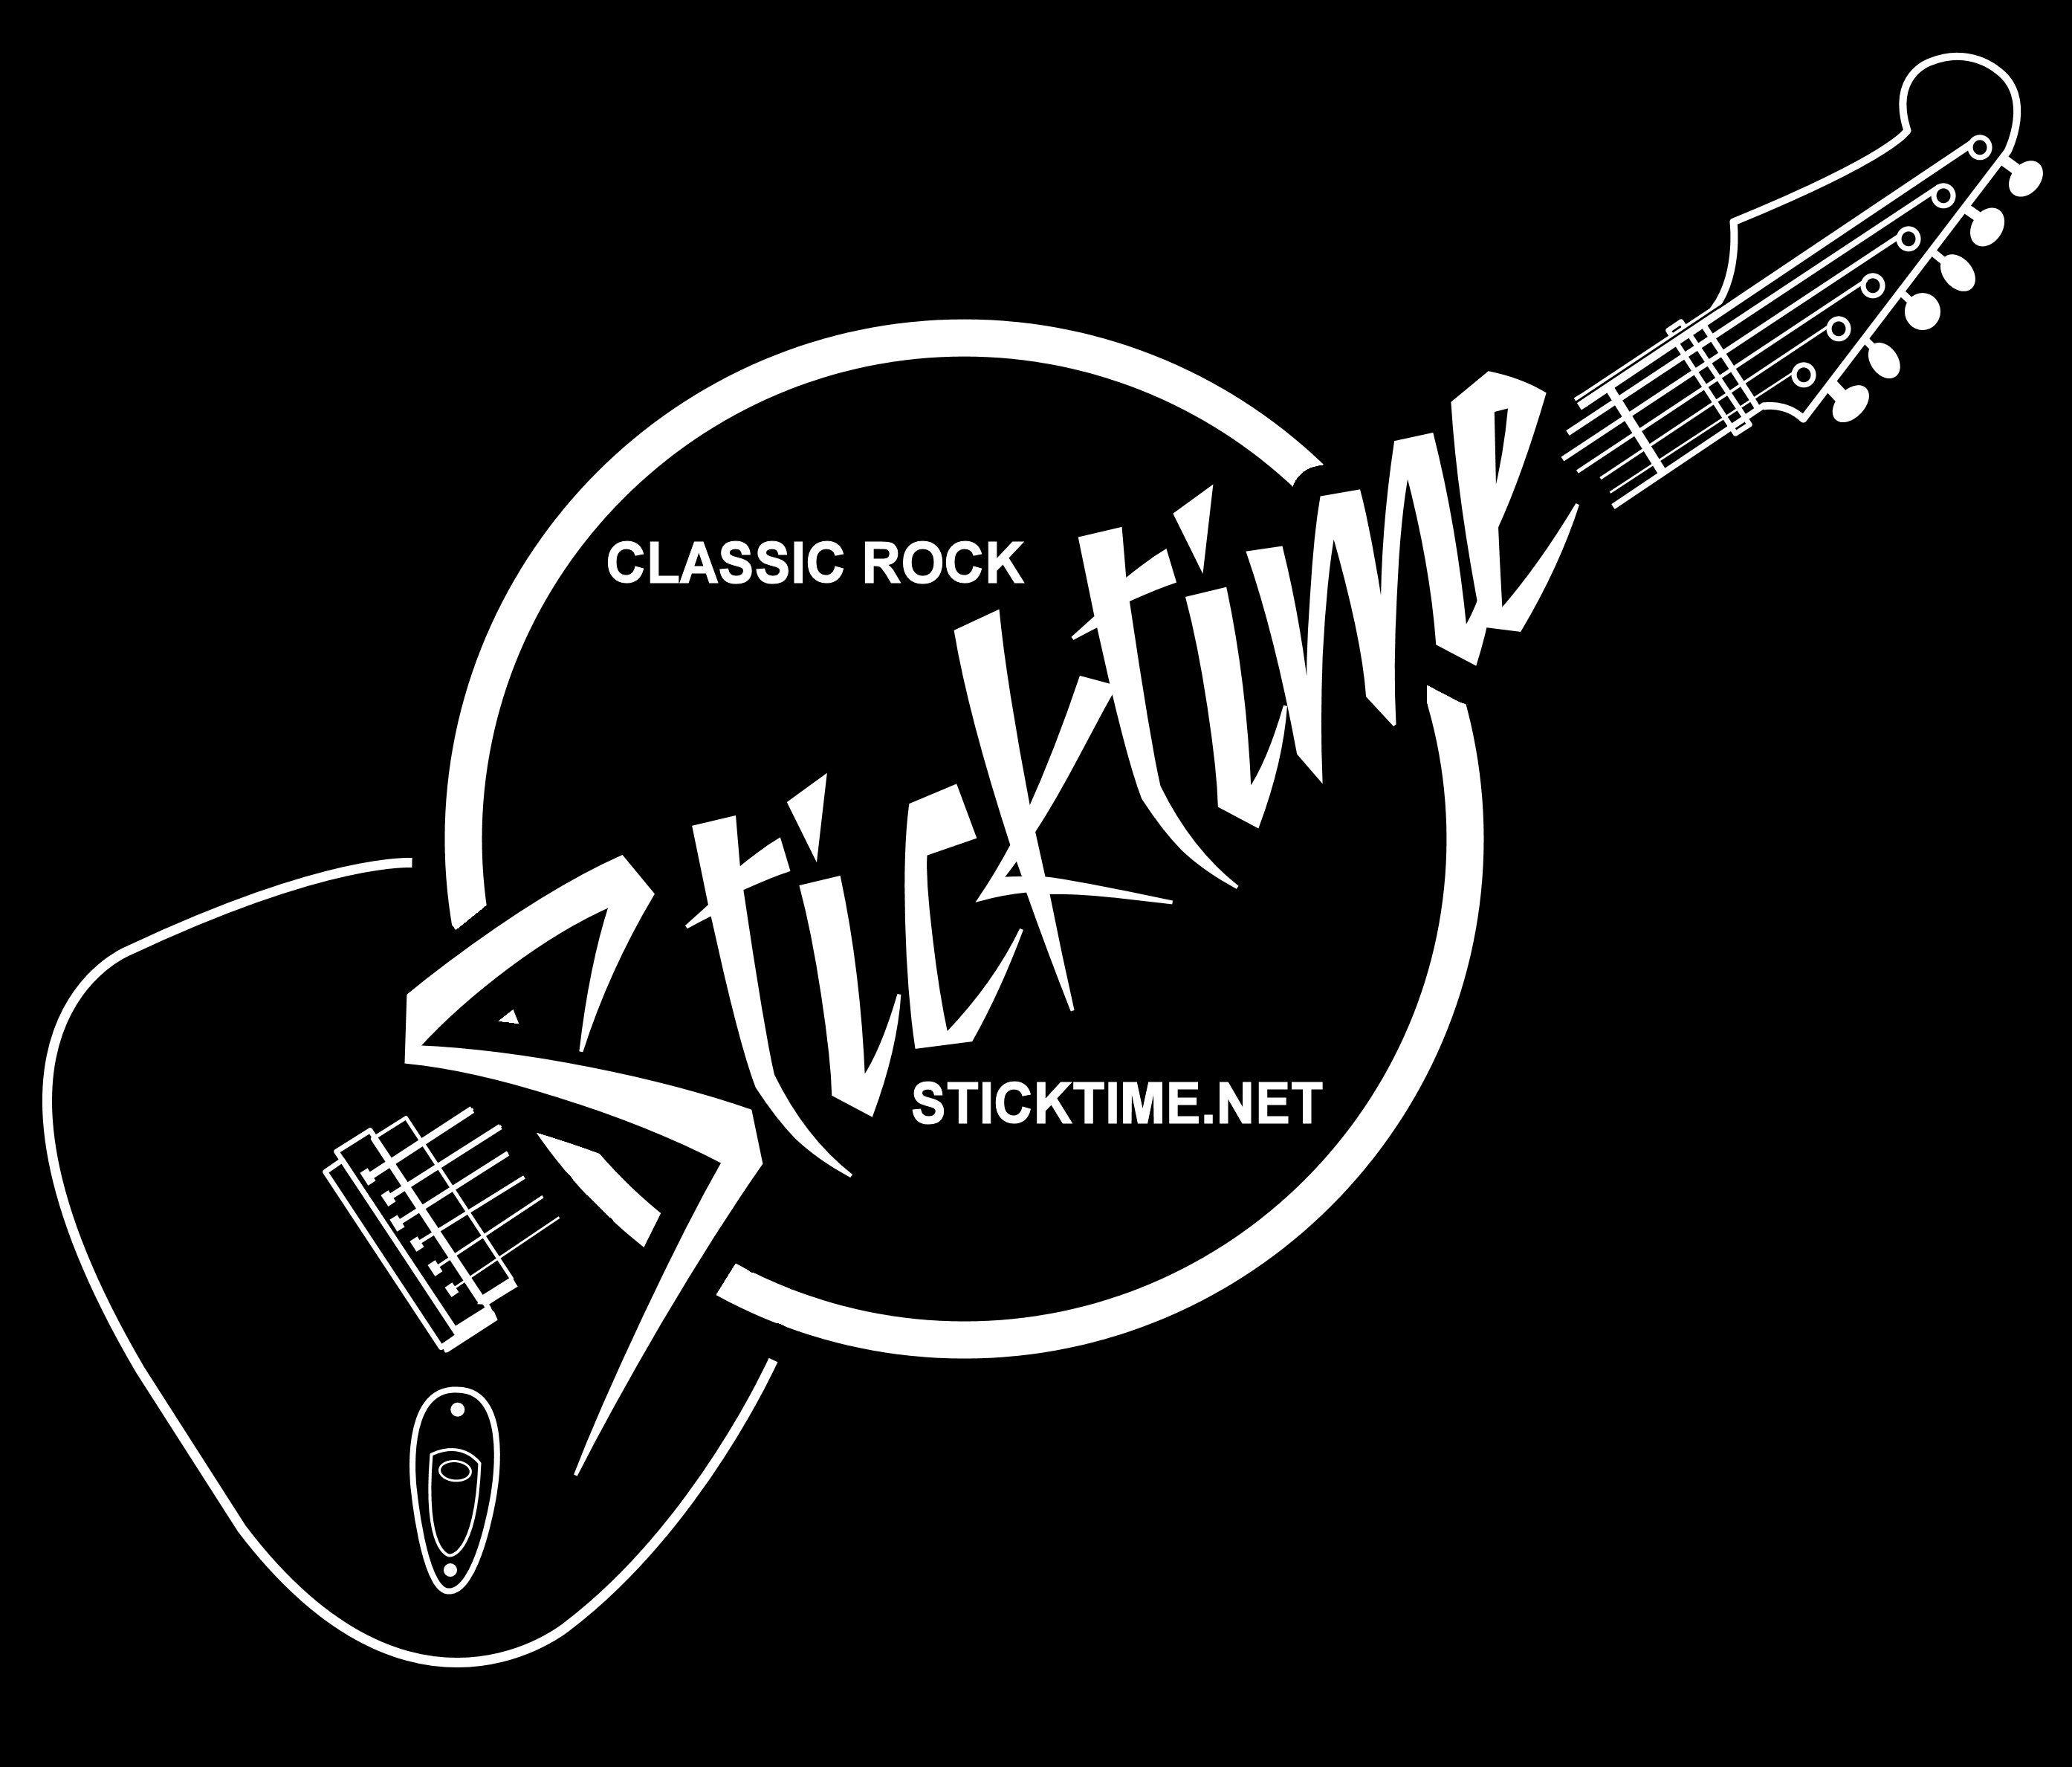 Classic Rock Band Logo - Sticktime Promotional Image Maryland's Premier Classic